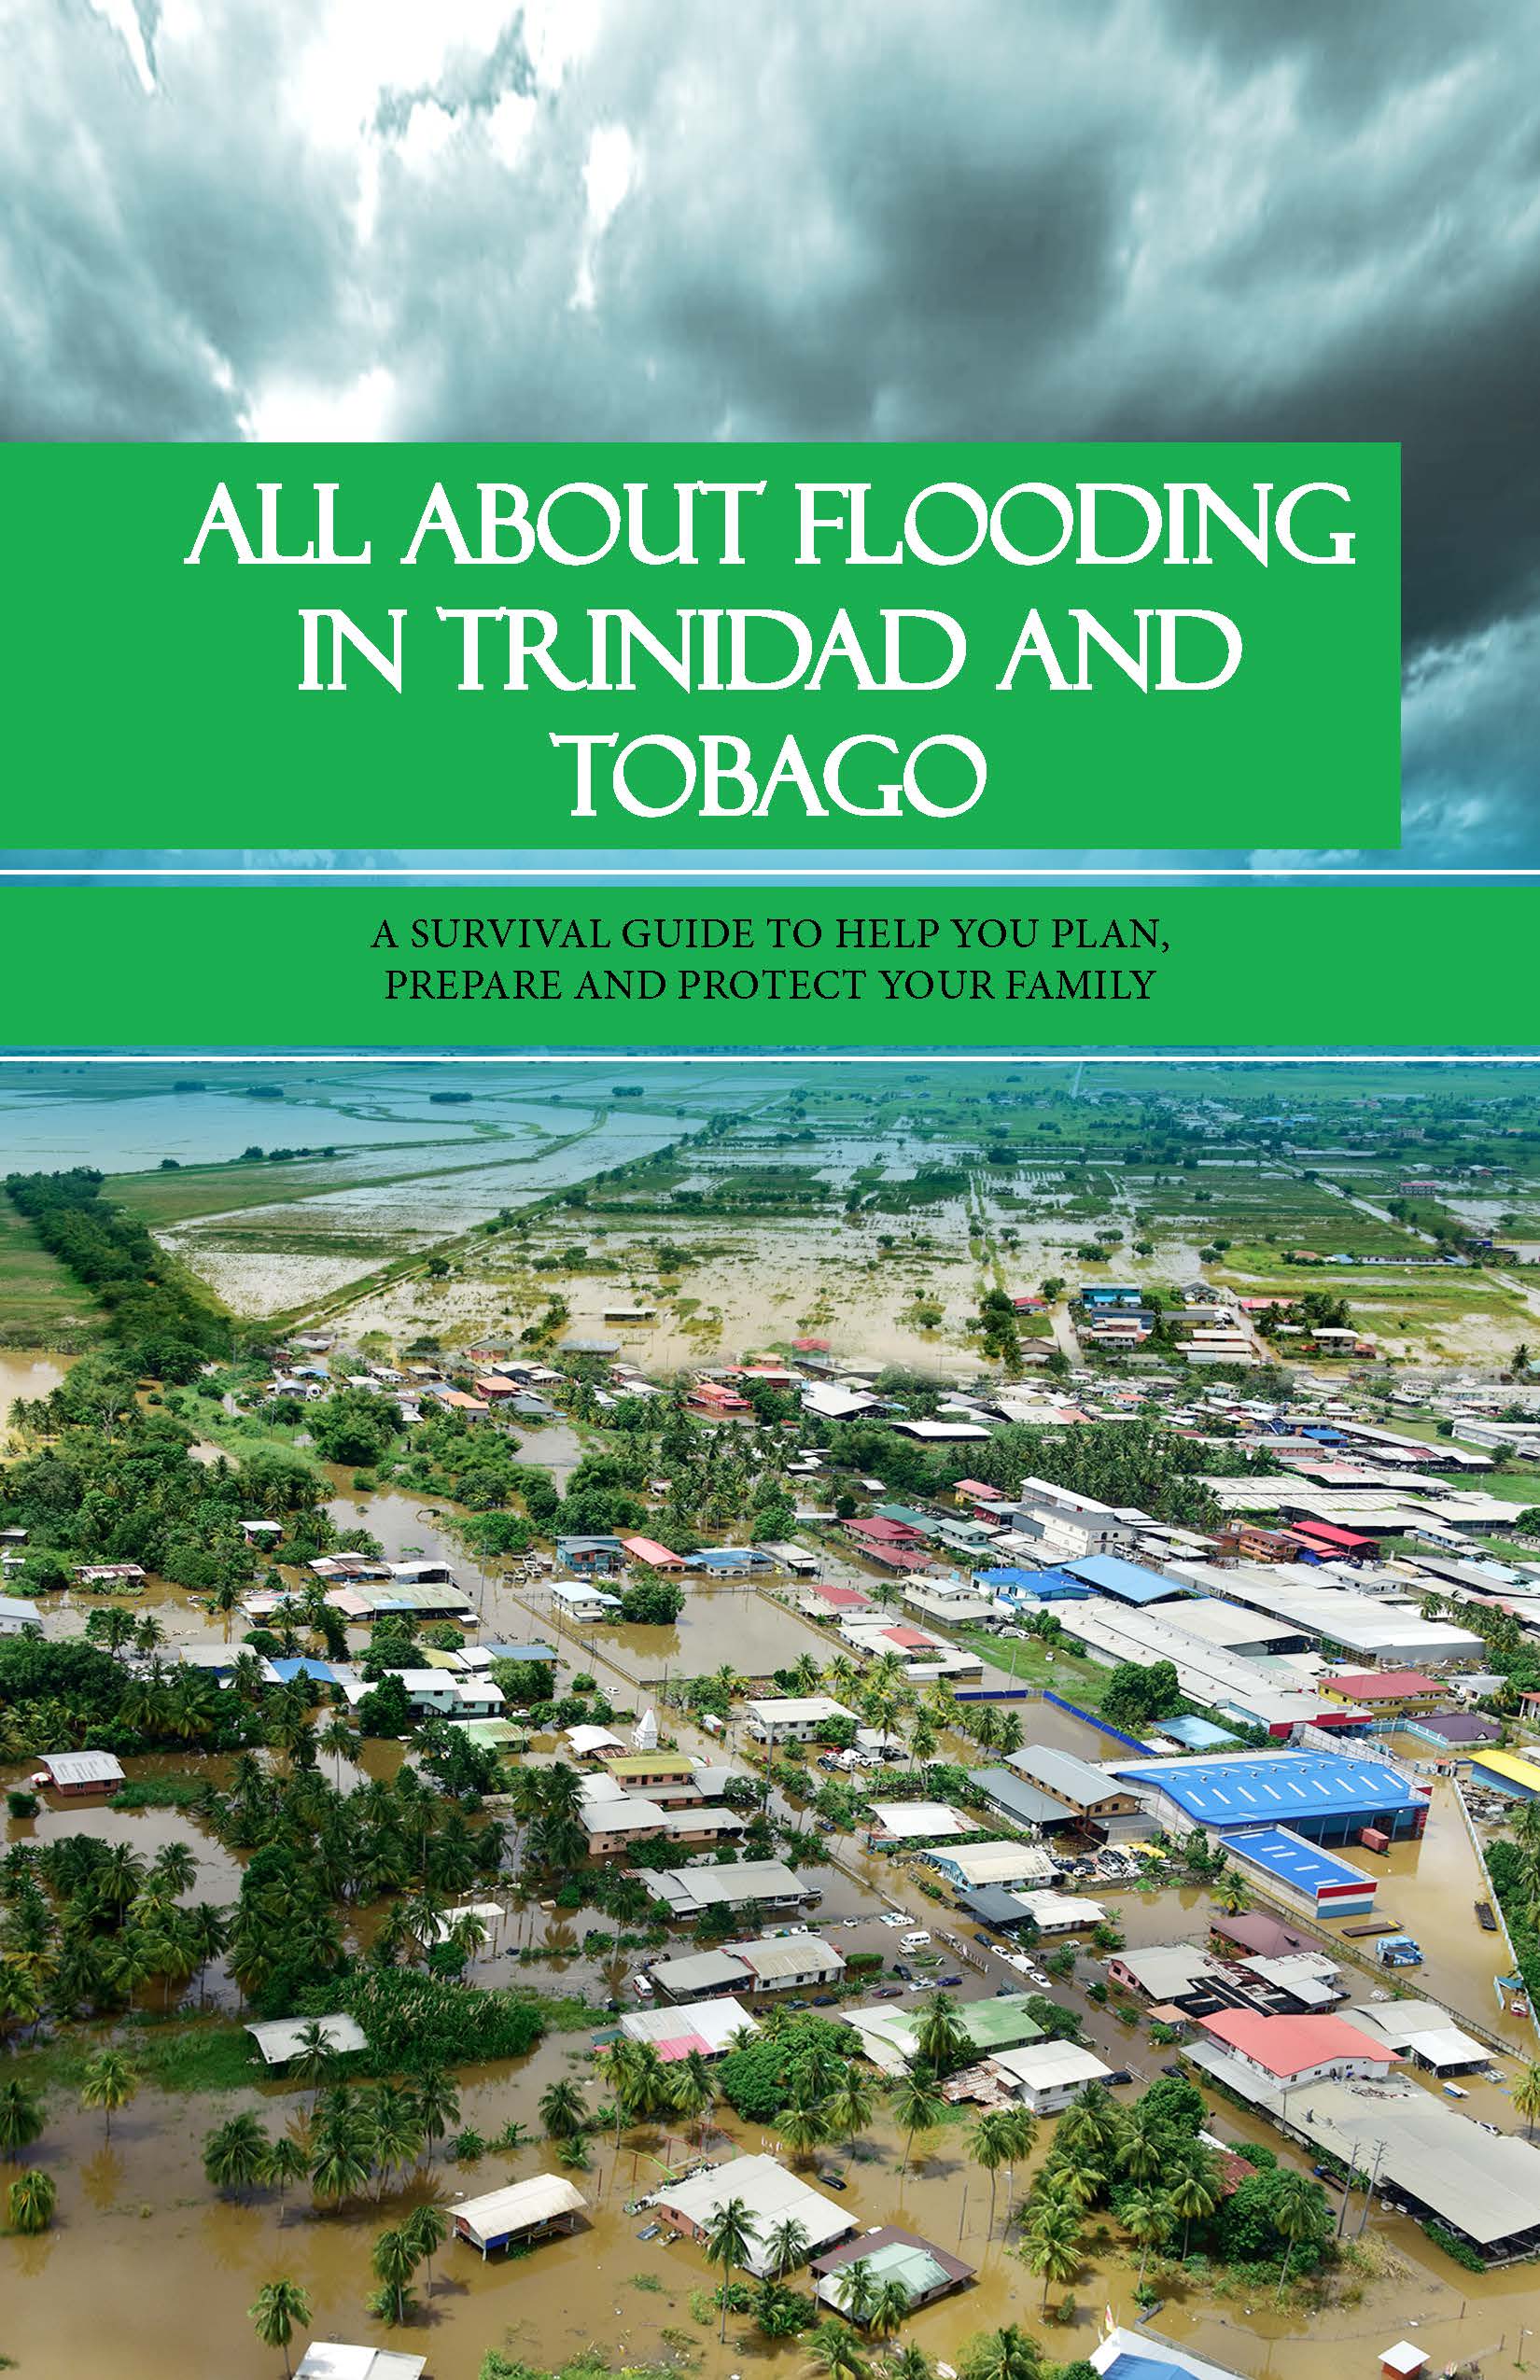 All-About-Flooding-in-Trinidad-and-Tobago-(1)-1.jpg